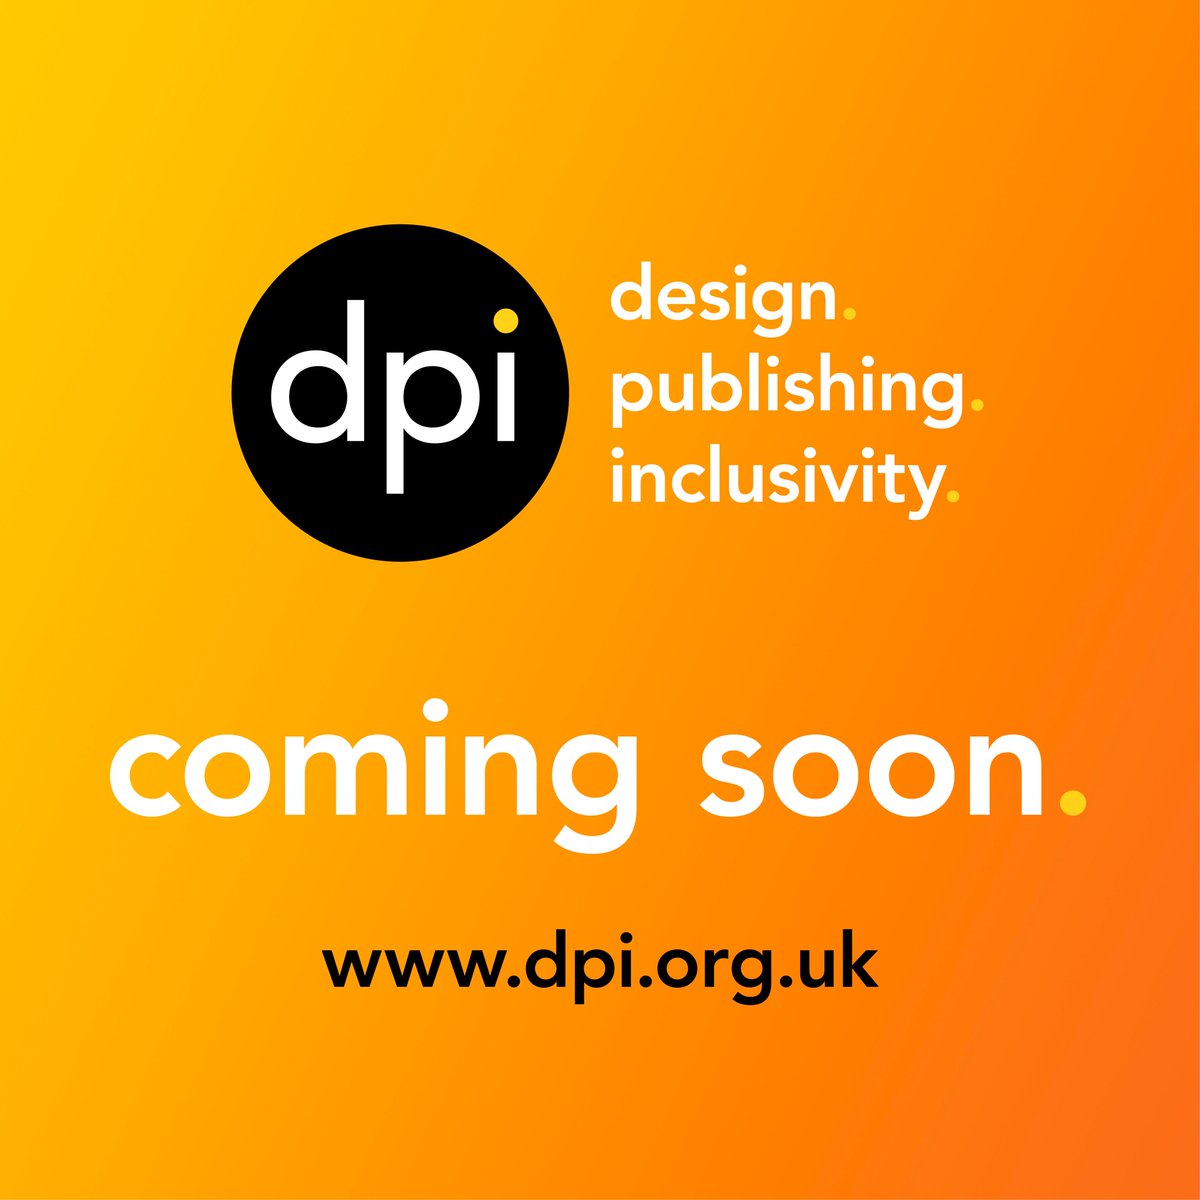 BIG NEWS COMING SOON - Watch this space!